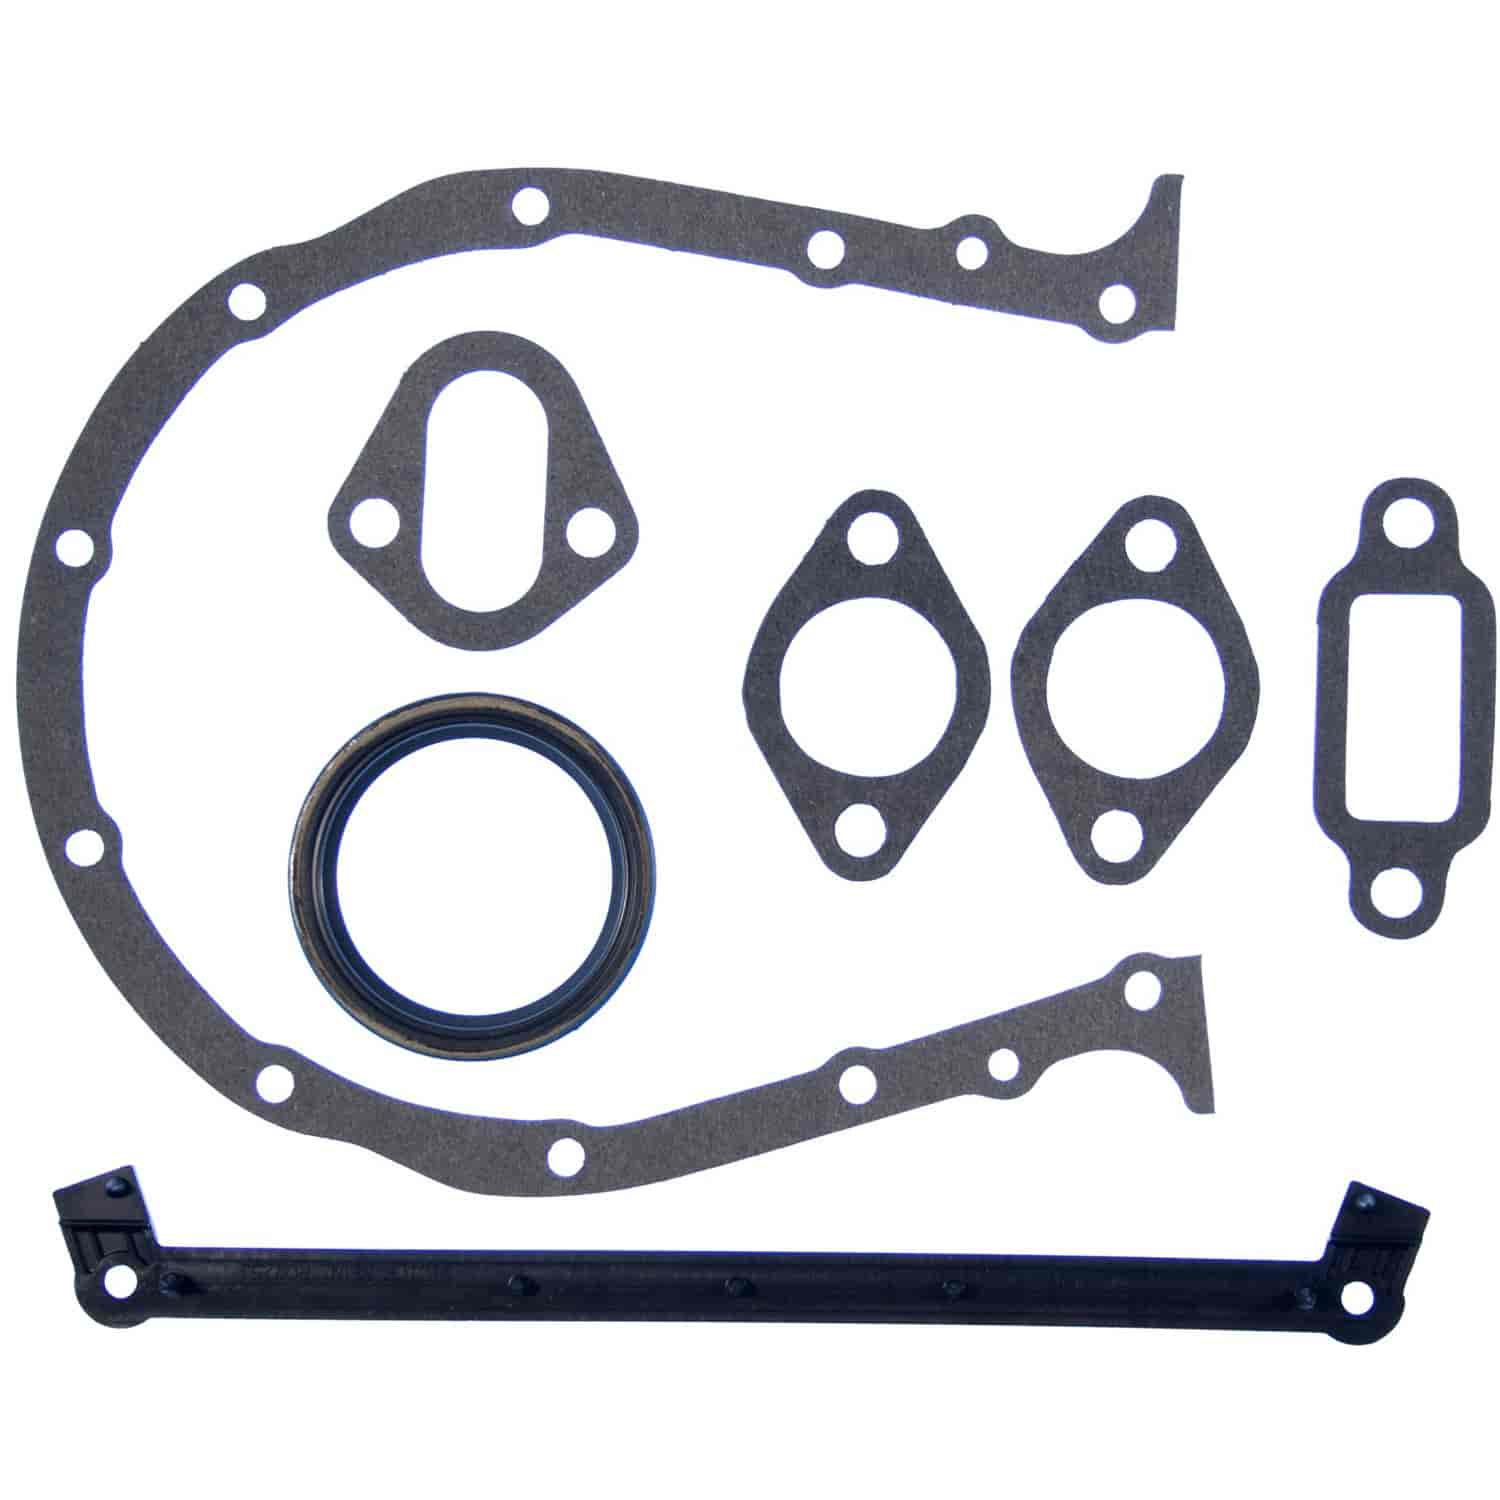 Timing Cover Gasket Set 1965-1990 Big Block Chevy 396/402/427/454